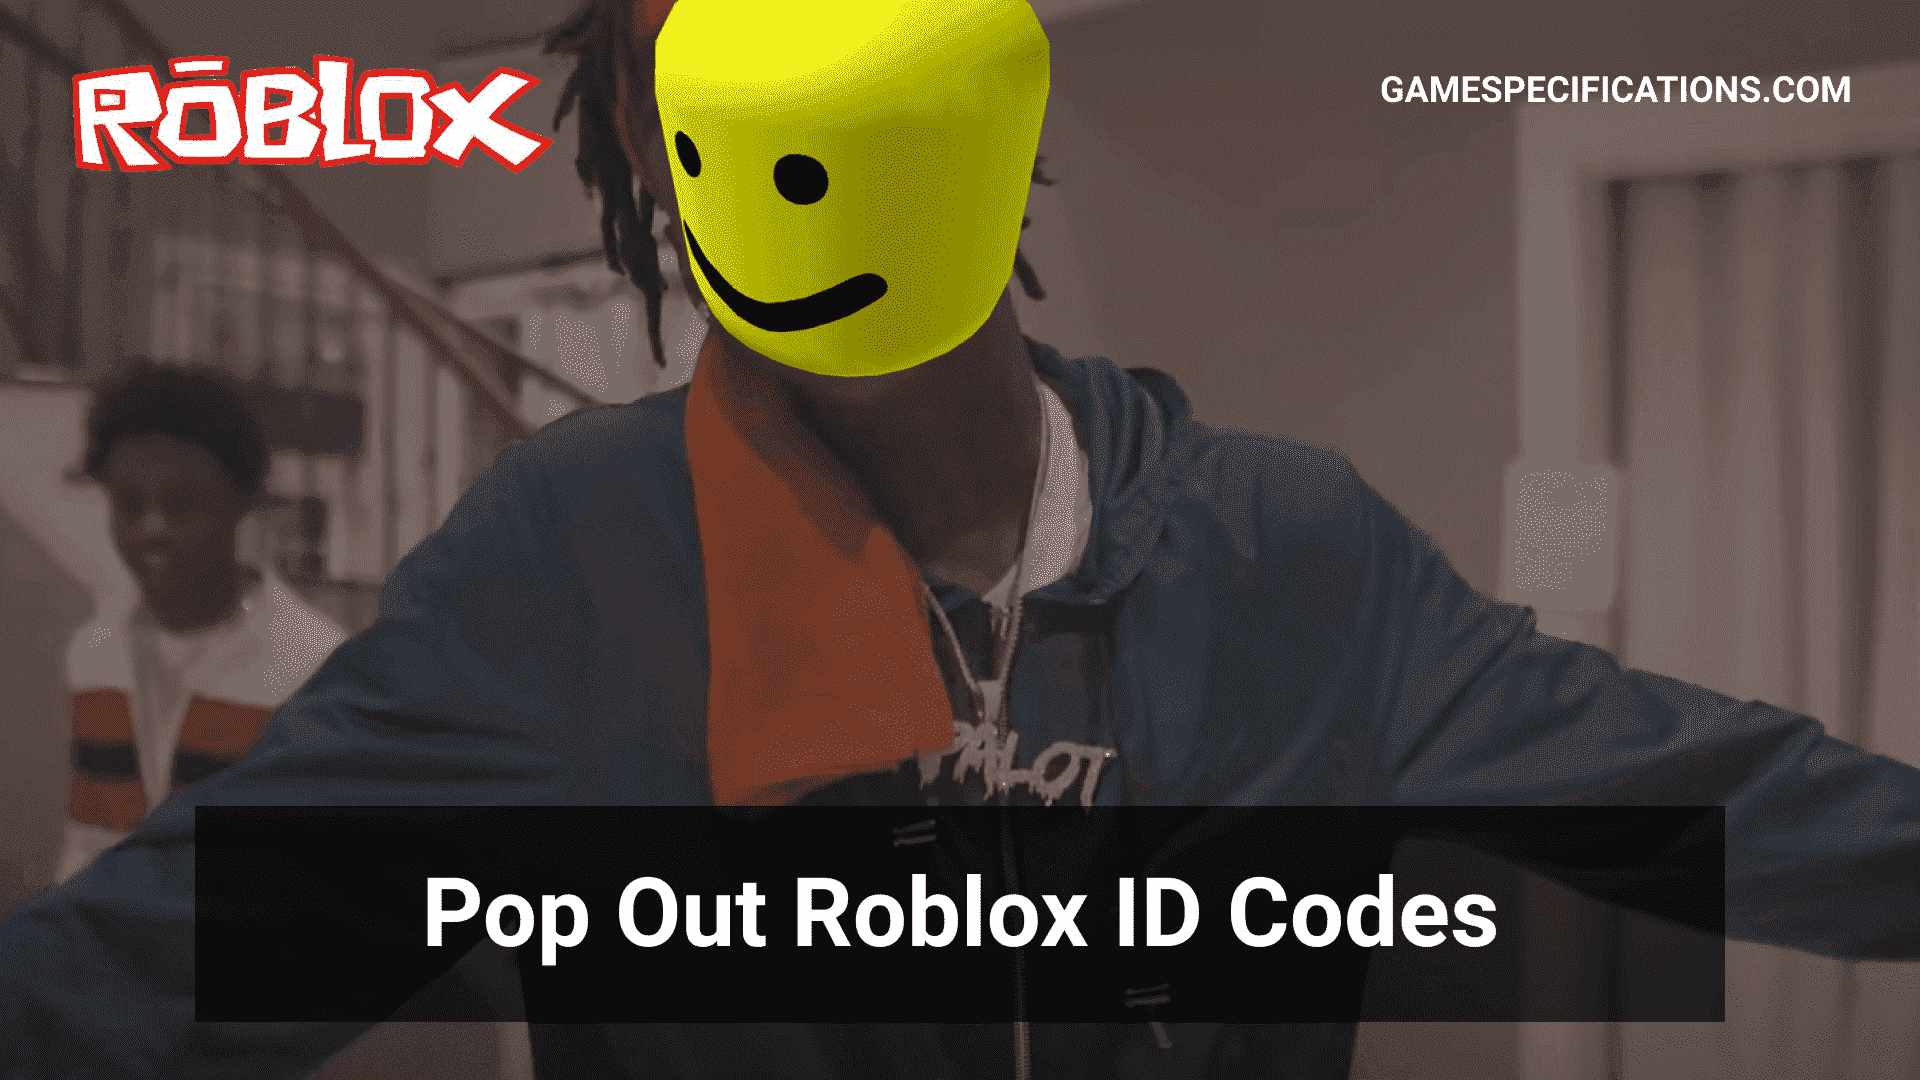 Pop Out Roblox Id Codes To Enrich Your Roblox 2020 Game Specifications - lil nas x old town road roblox music code id